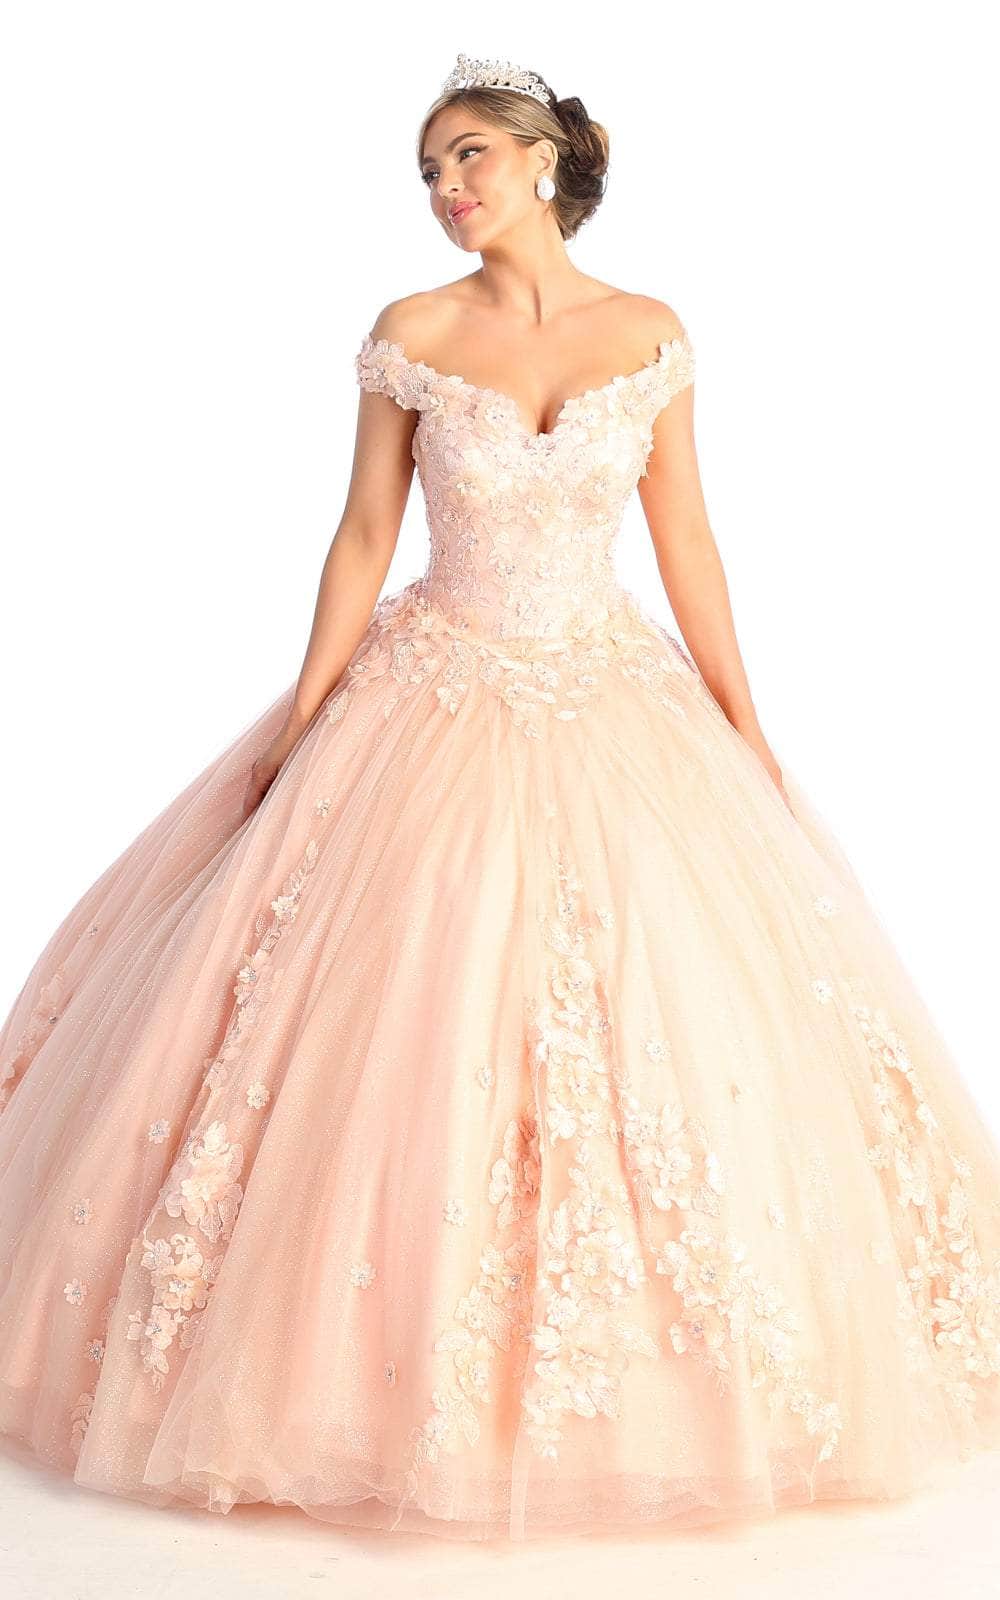 May Queen LK160 - 3D Floral Appliques Sweetheart Ball gown
